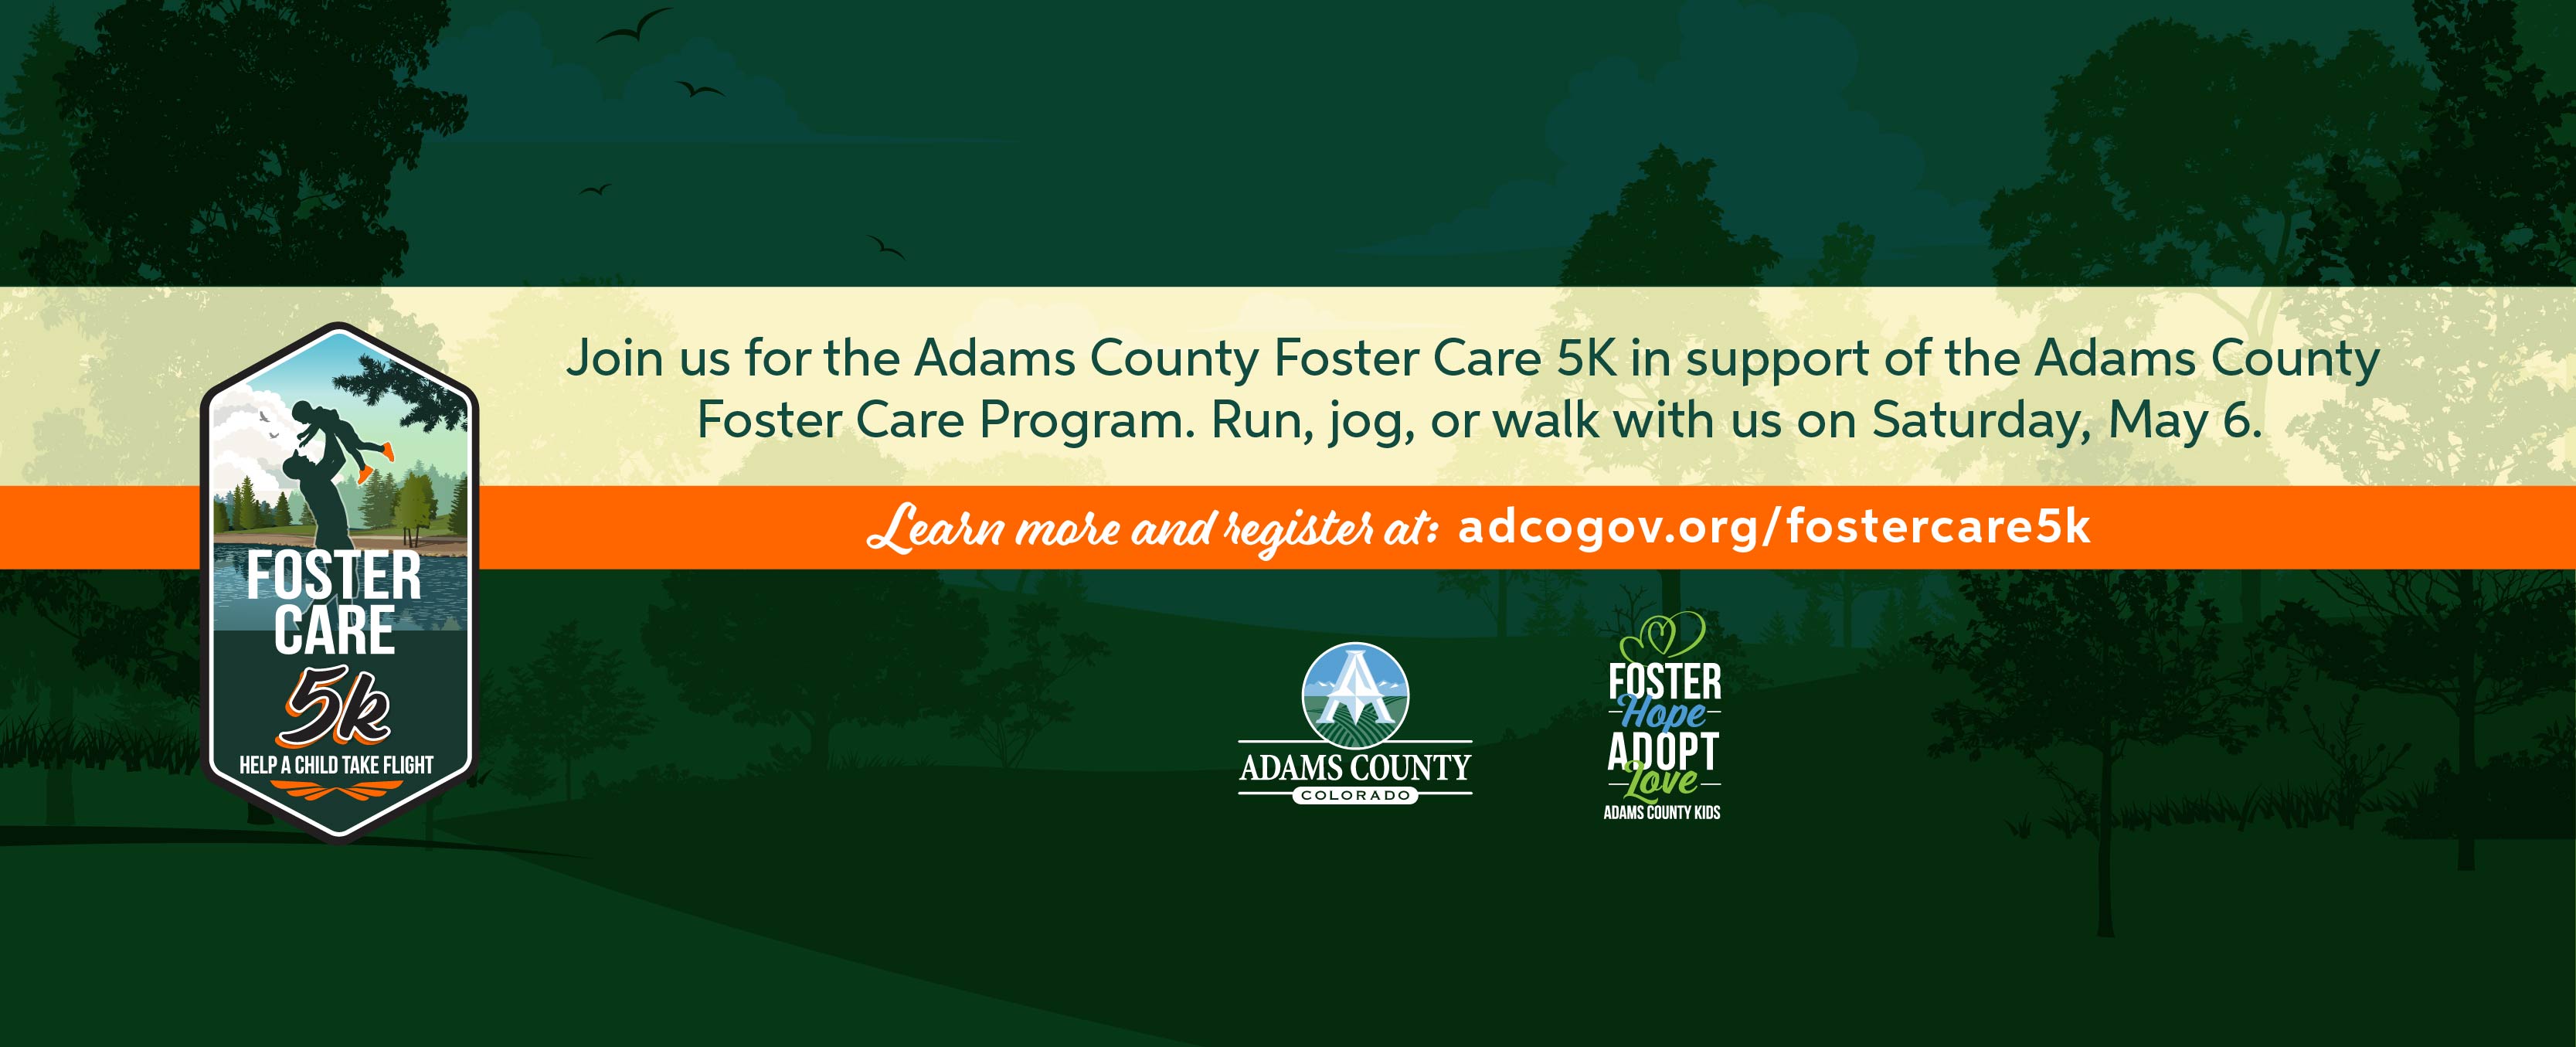 Foster Care 5K